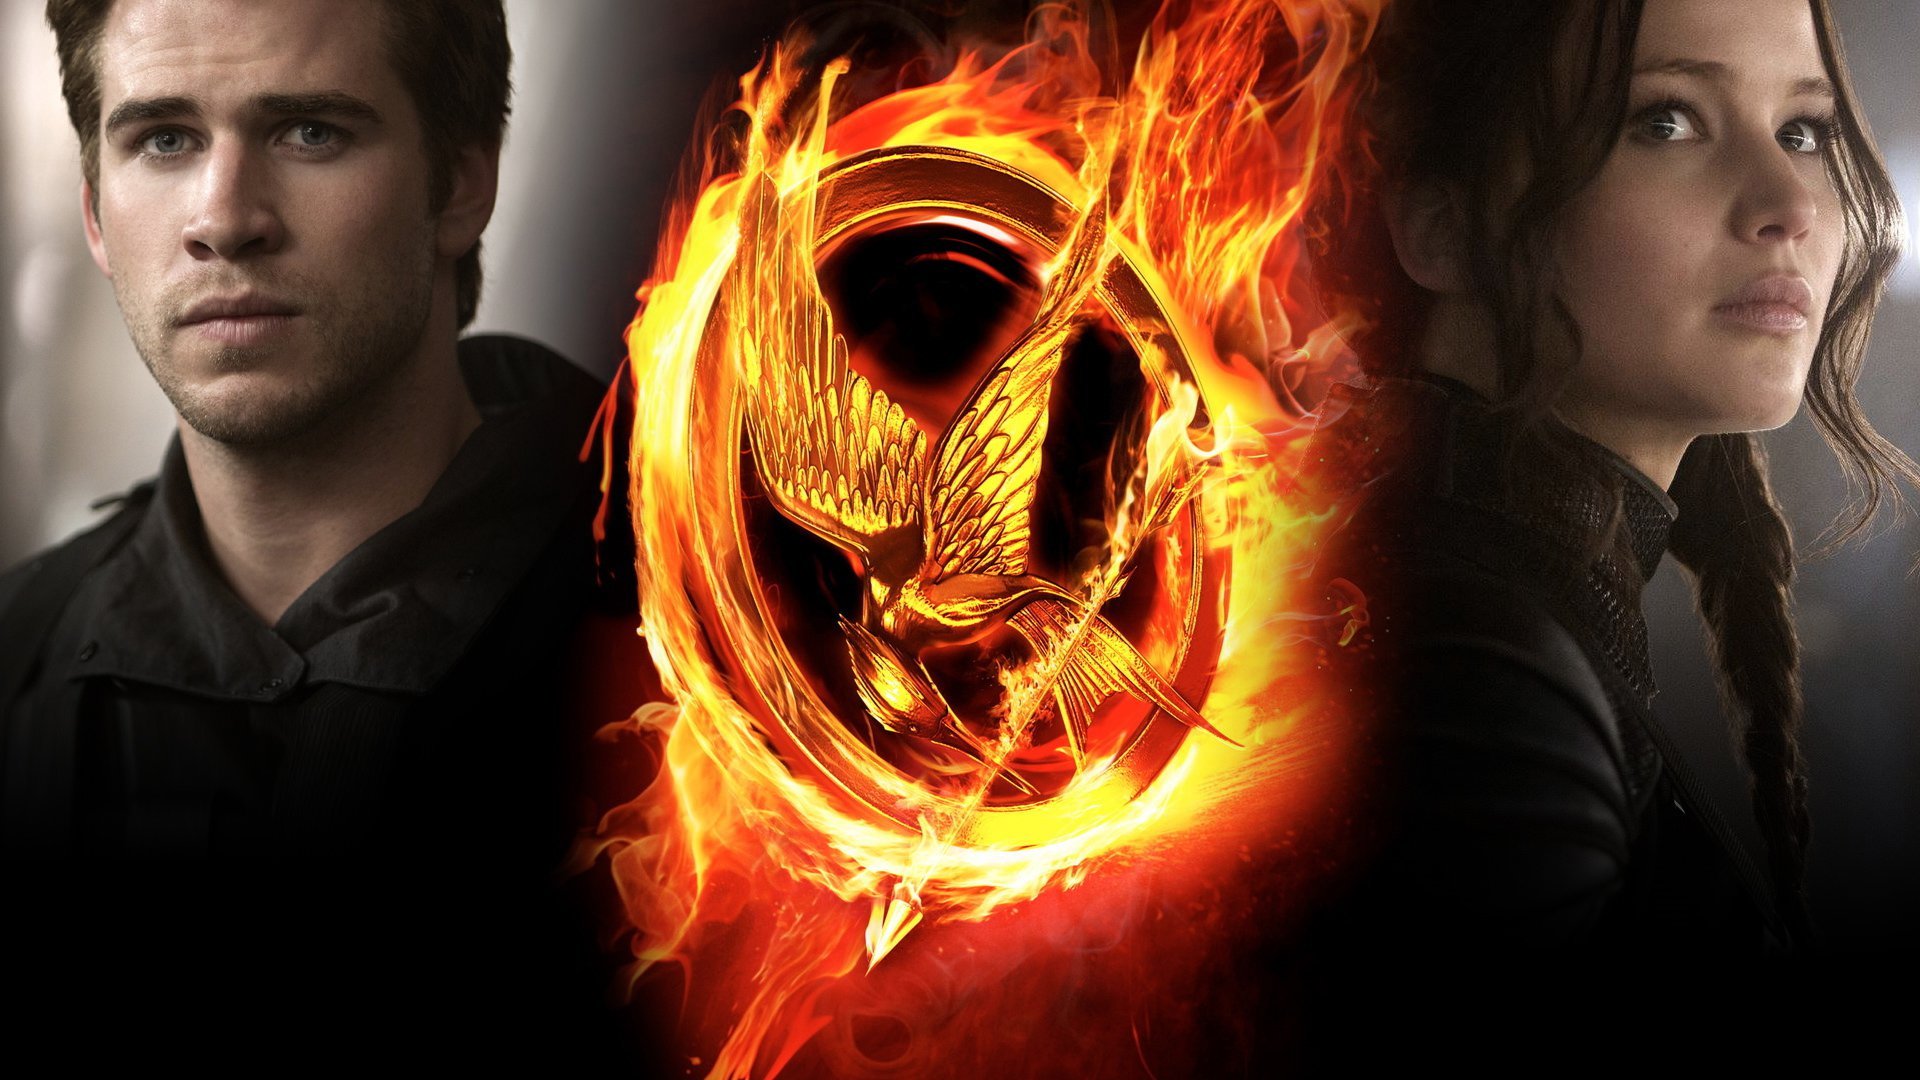 hunger games movie free download utorrent for pc